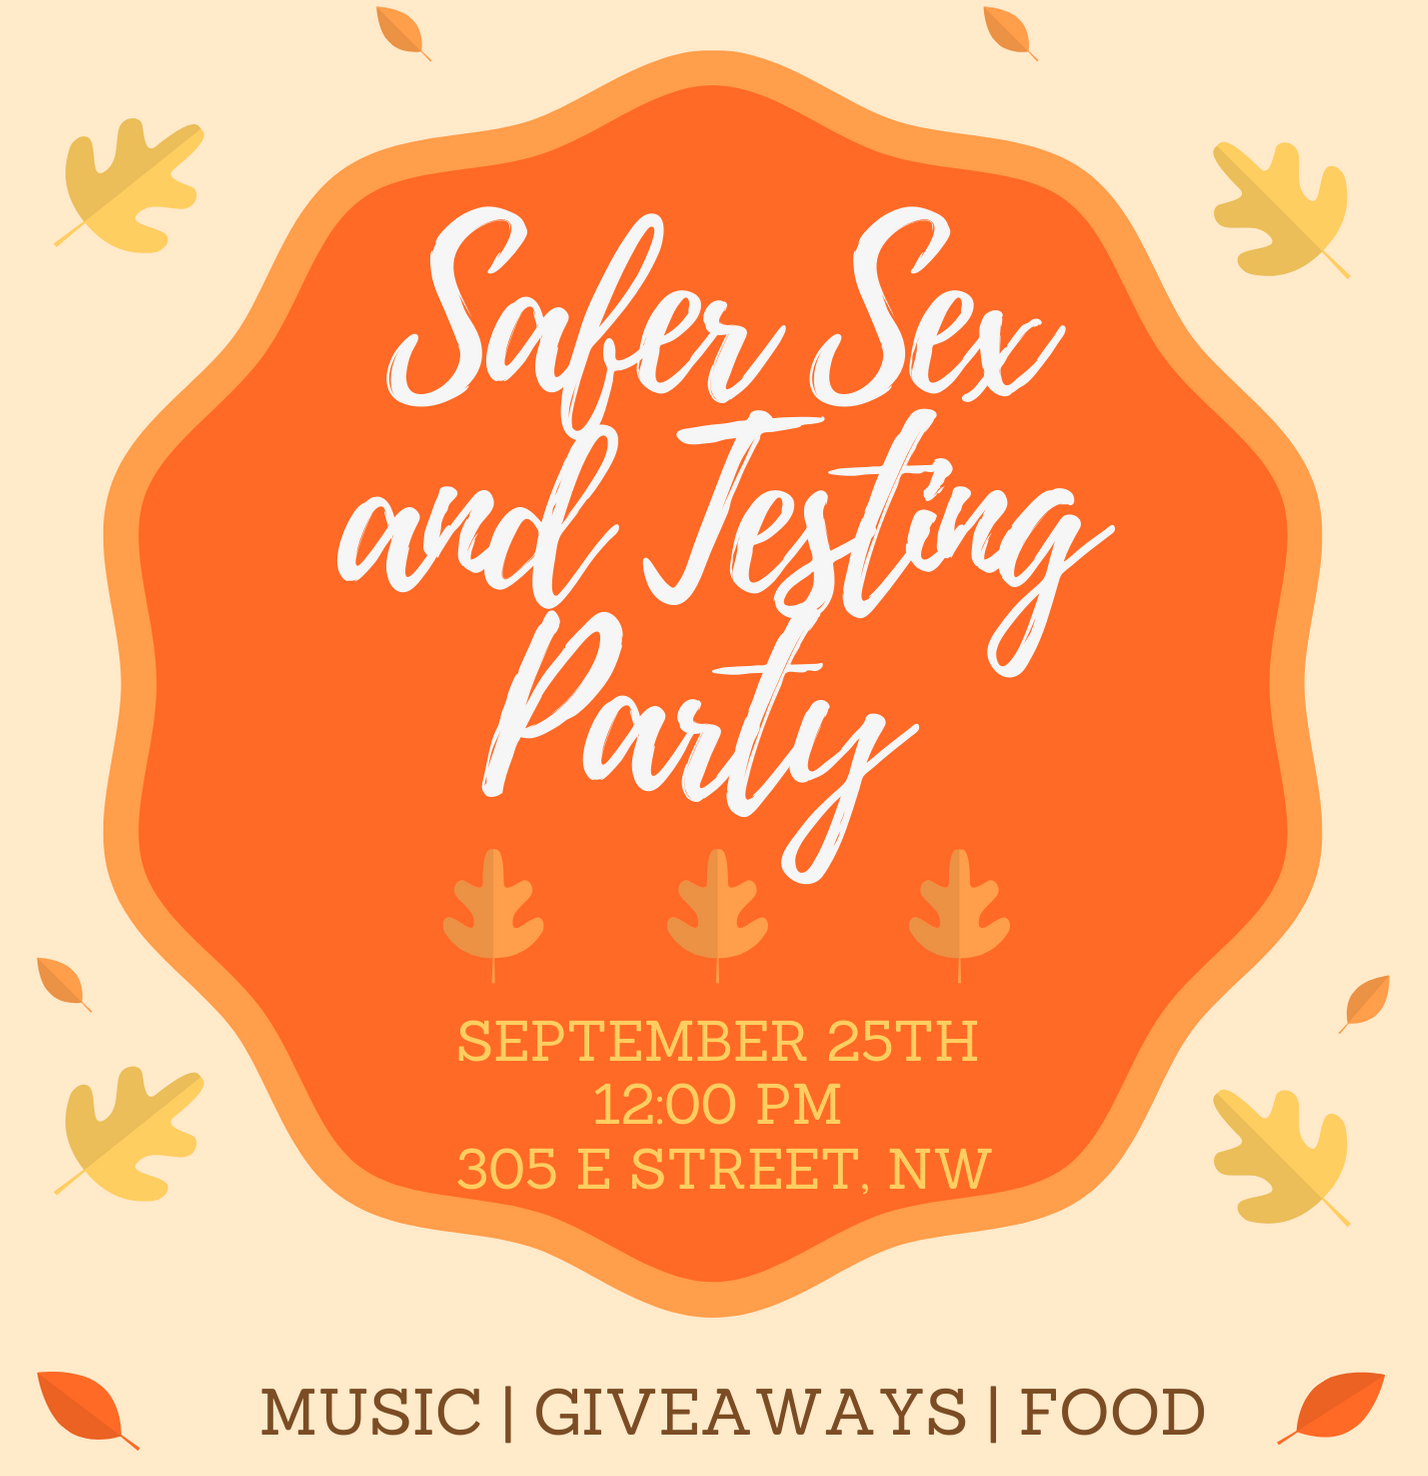 September 25, 2020 Safe Sex and Testing Party